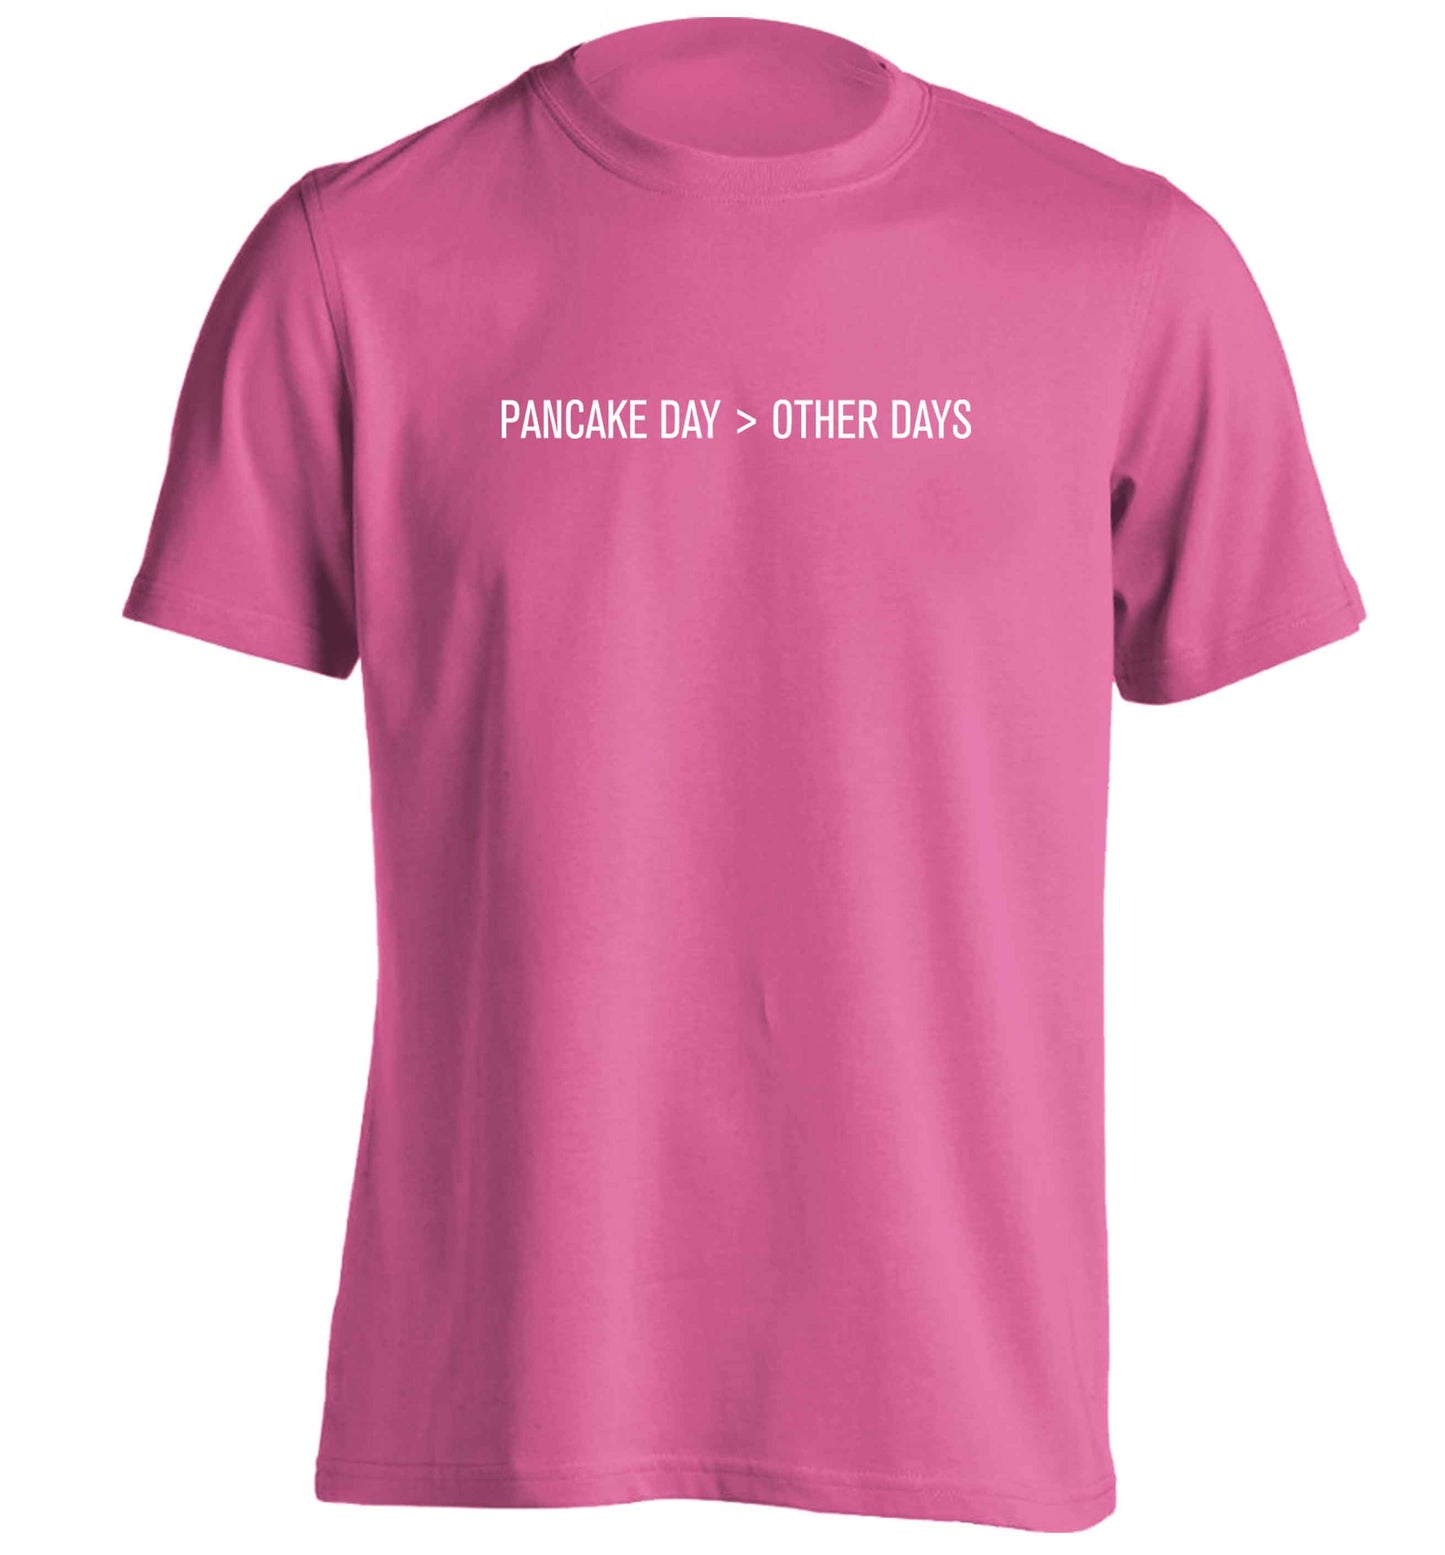 Pancake day > other days adults unisex pink Tshirt 2XL